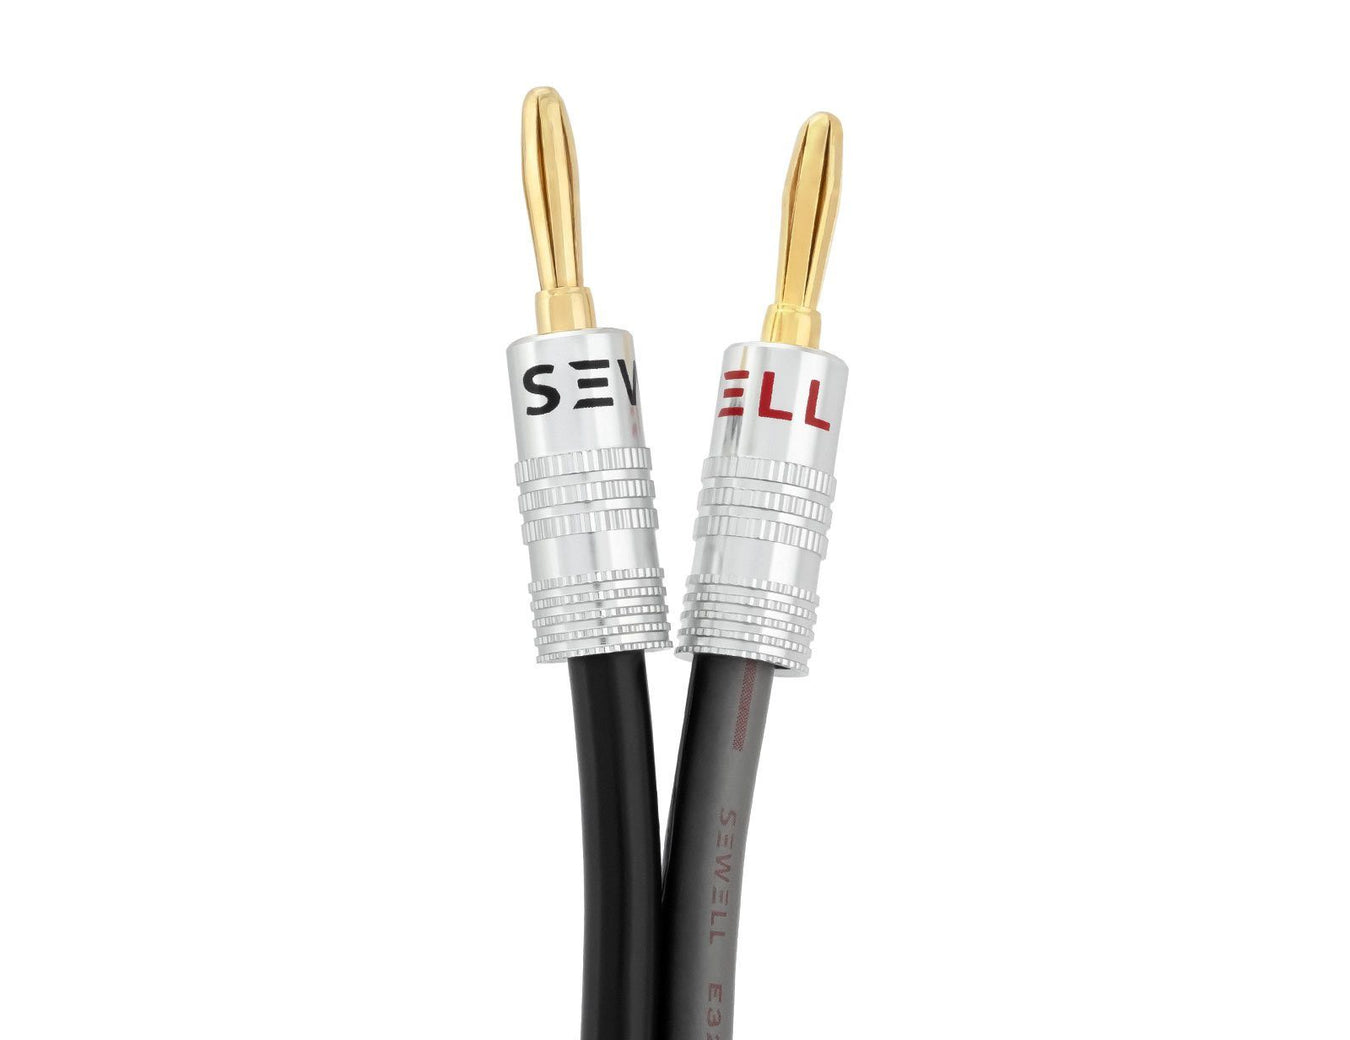 Silverback Cables and Connectors